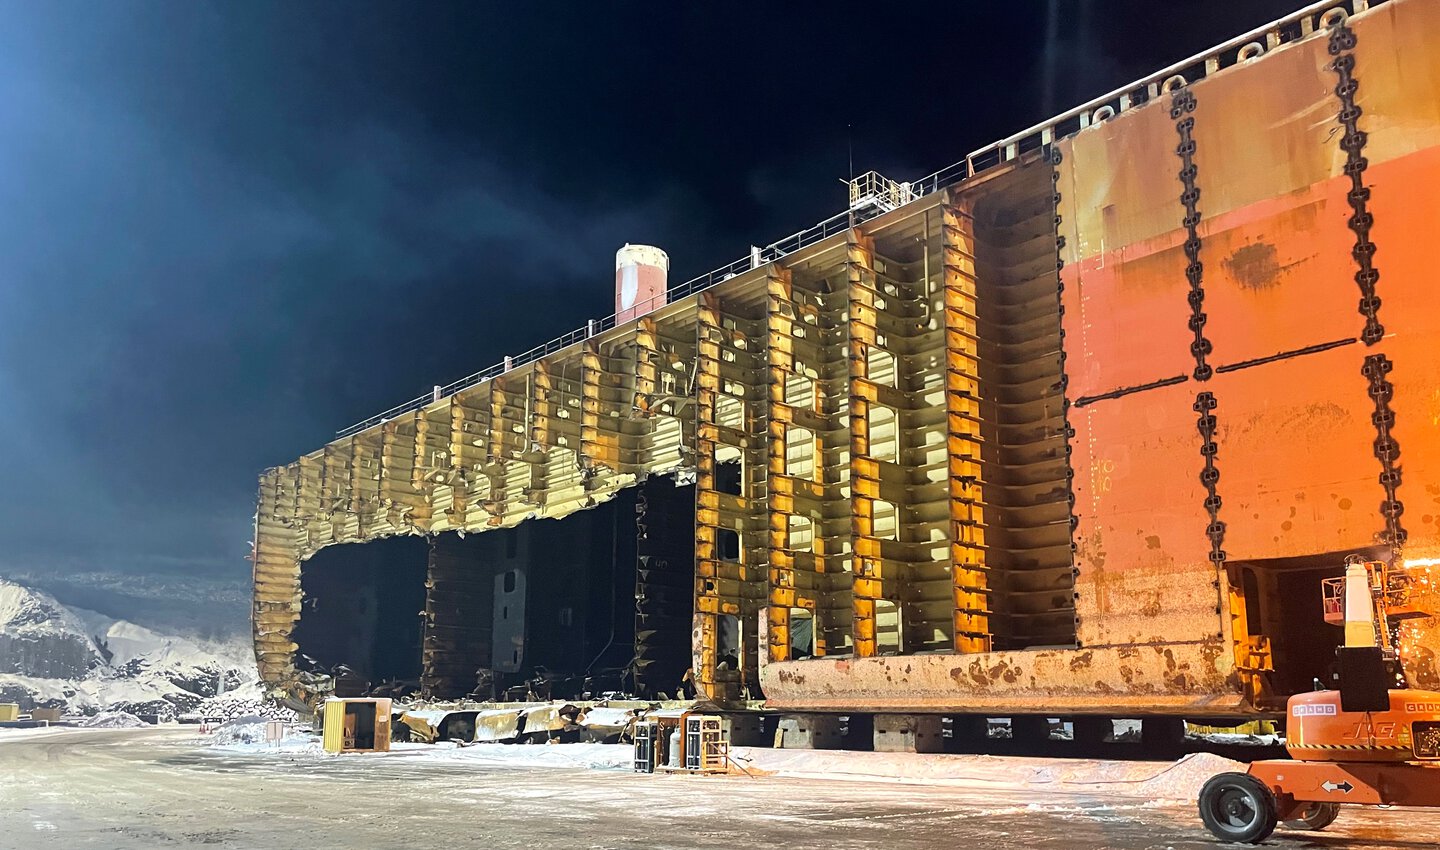 The steel plates were cut and processed at AF Miljøbase Vats before being forwarded to Skanska Stålfabrikker, which produces approved products for the construction and civil engineering industry.